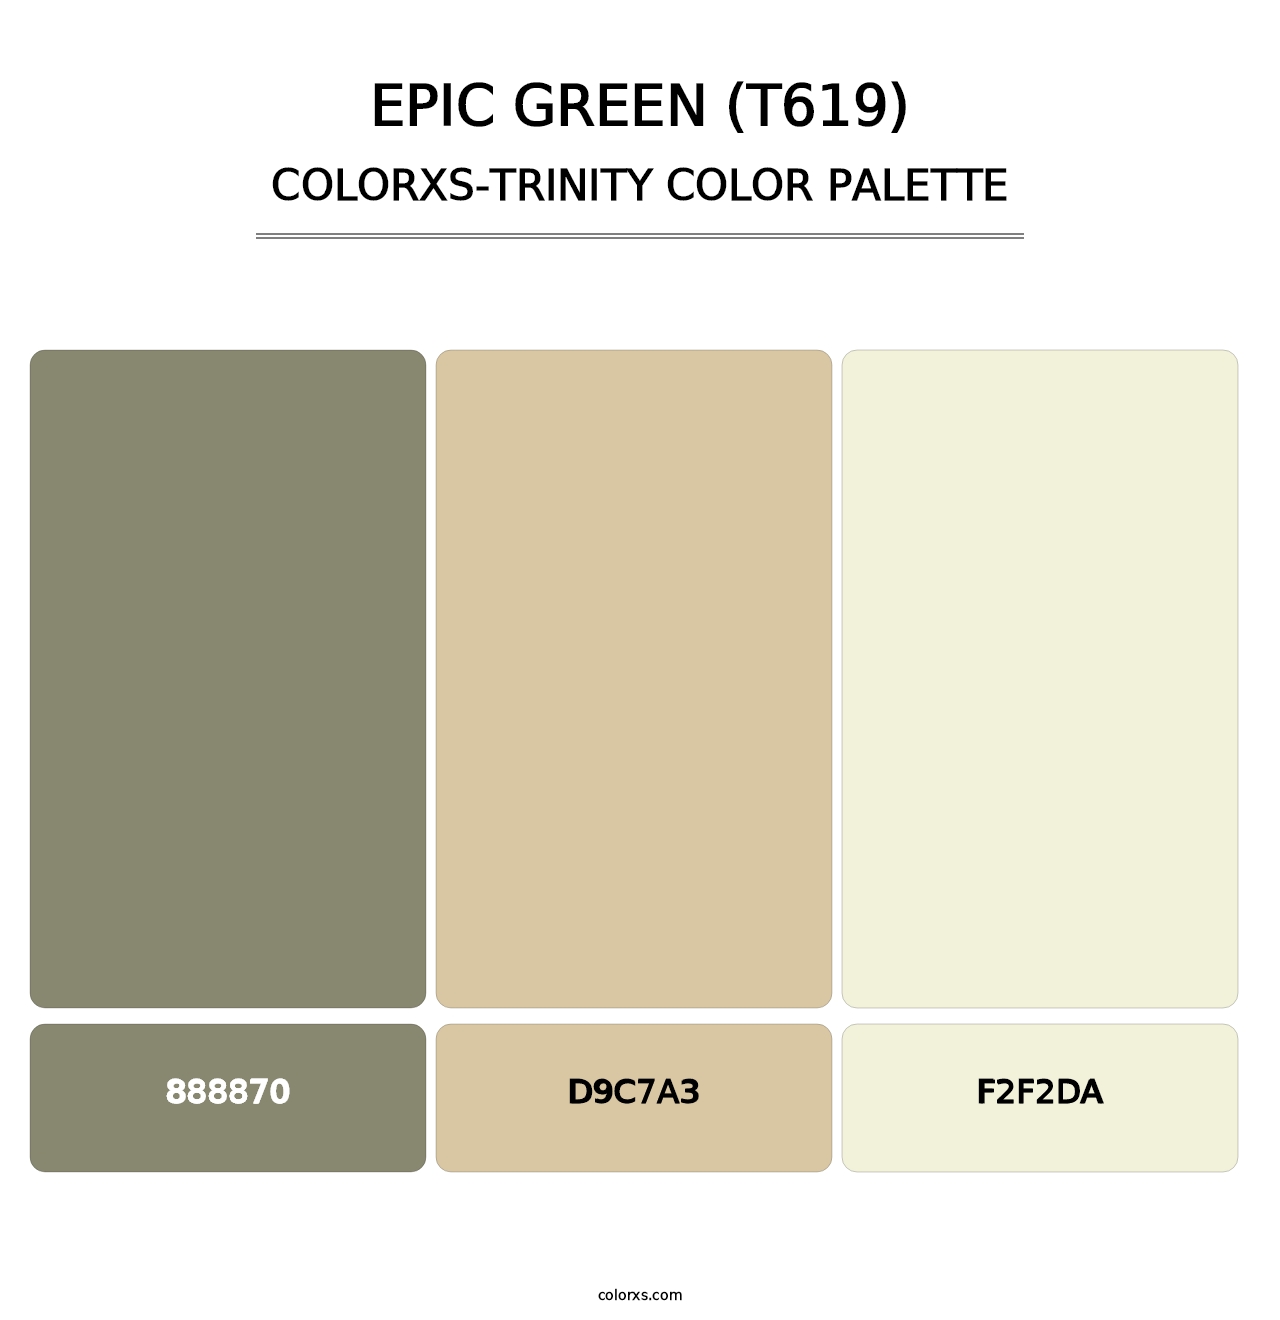 Epic Green (T619) - Colorxs Trinity Palette